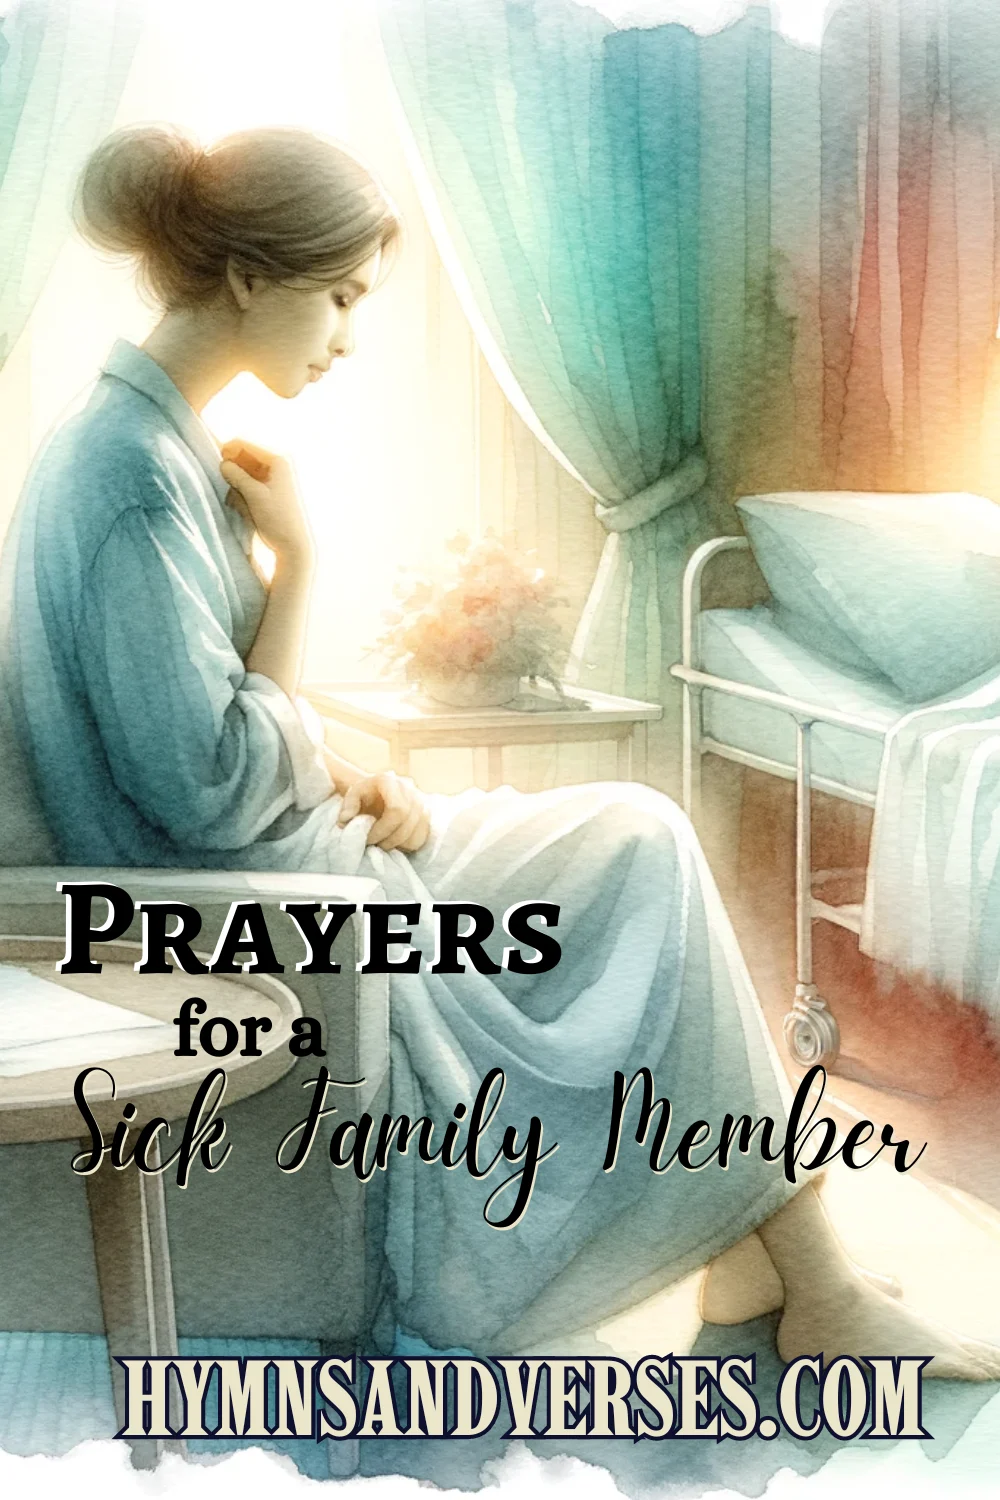 Pin image for prayers for a sick family member